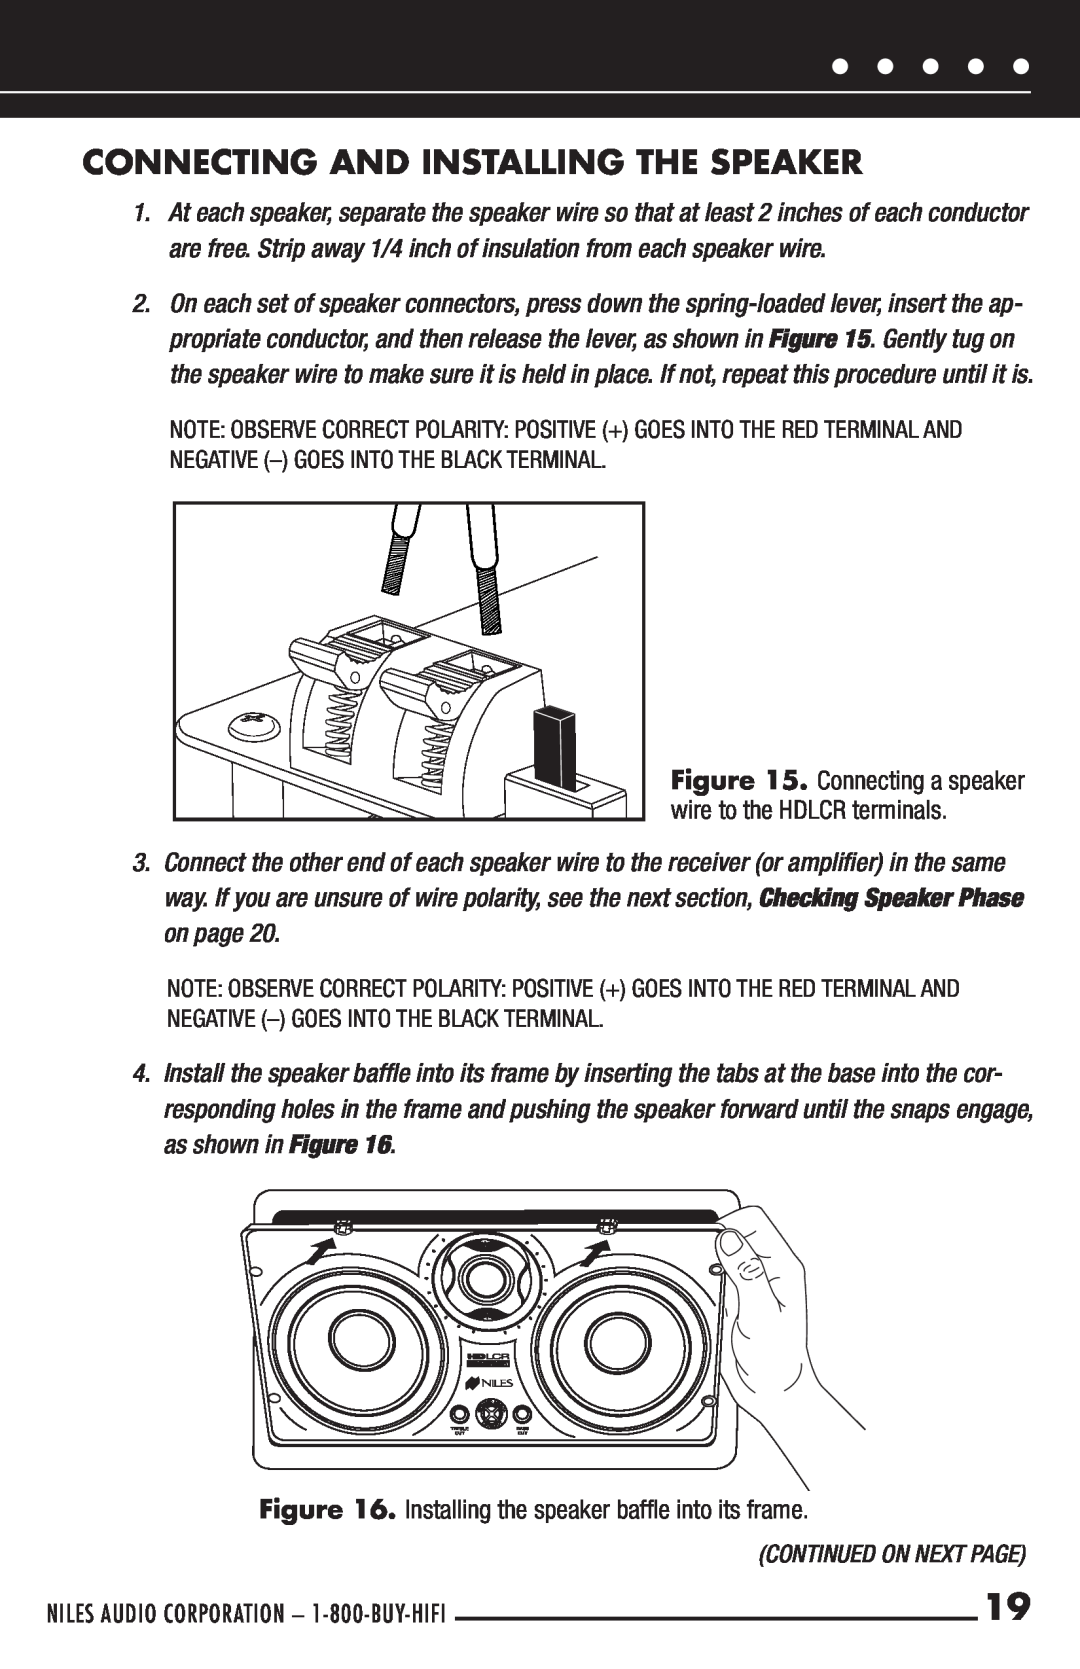 Niles Audio HDLCR manual Connecting And Installing The Speaker, Continued On Next Page 